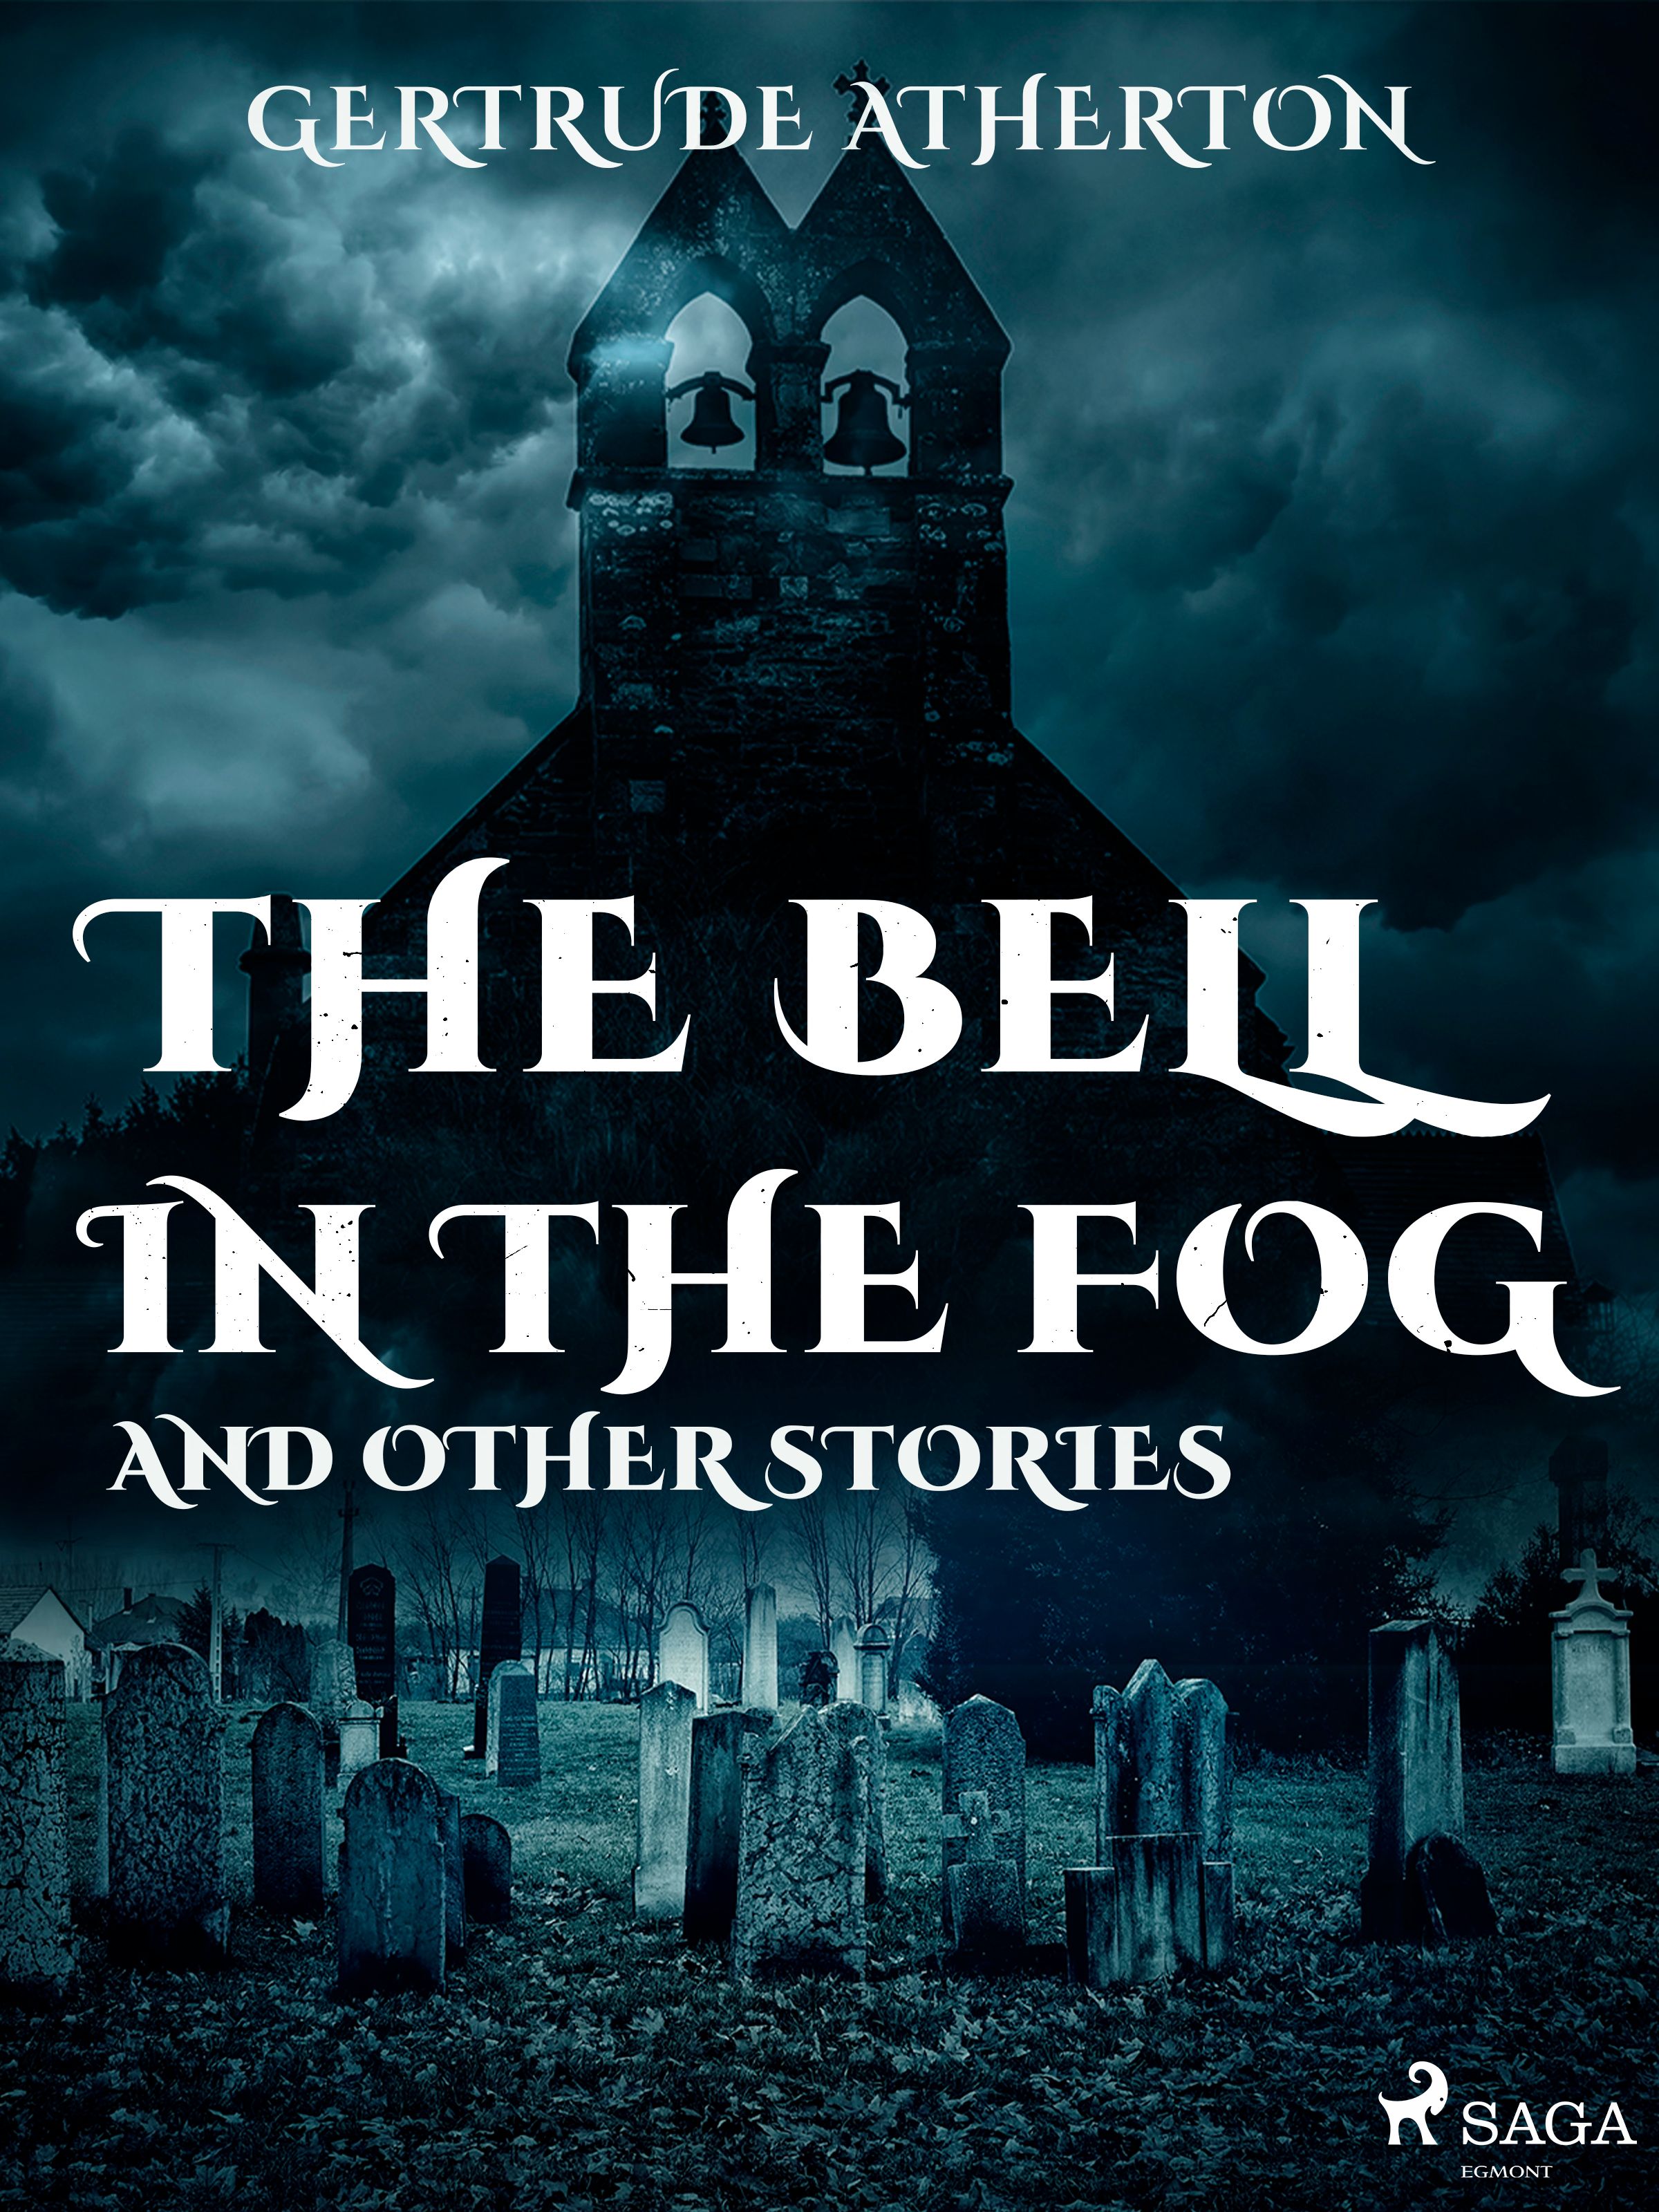 The Bell in the Fog, and Other Stories, e-bog af Gertrude Atherton